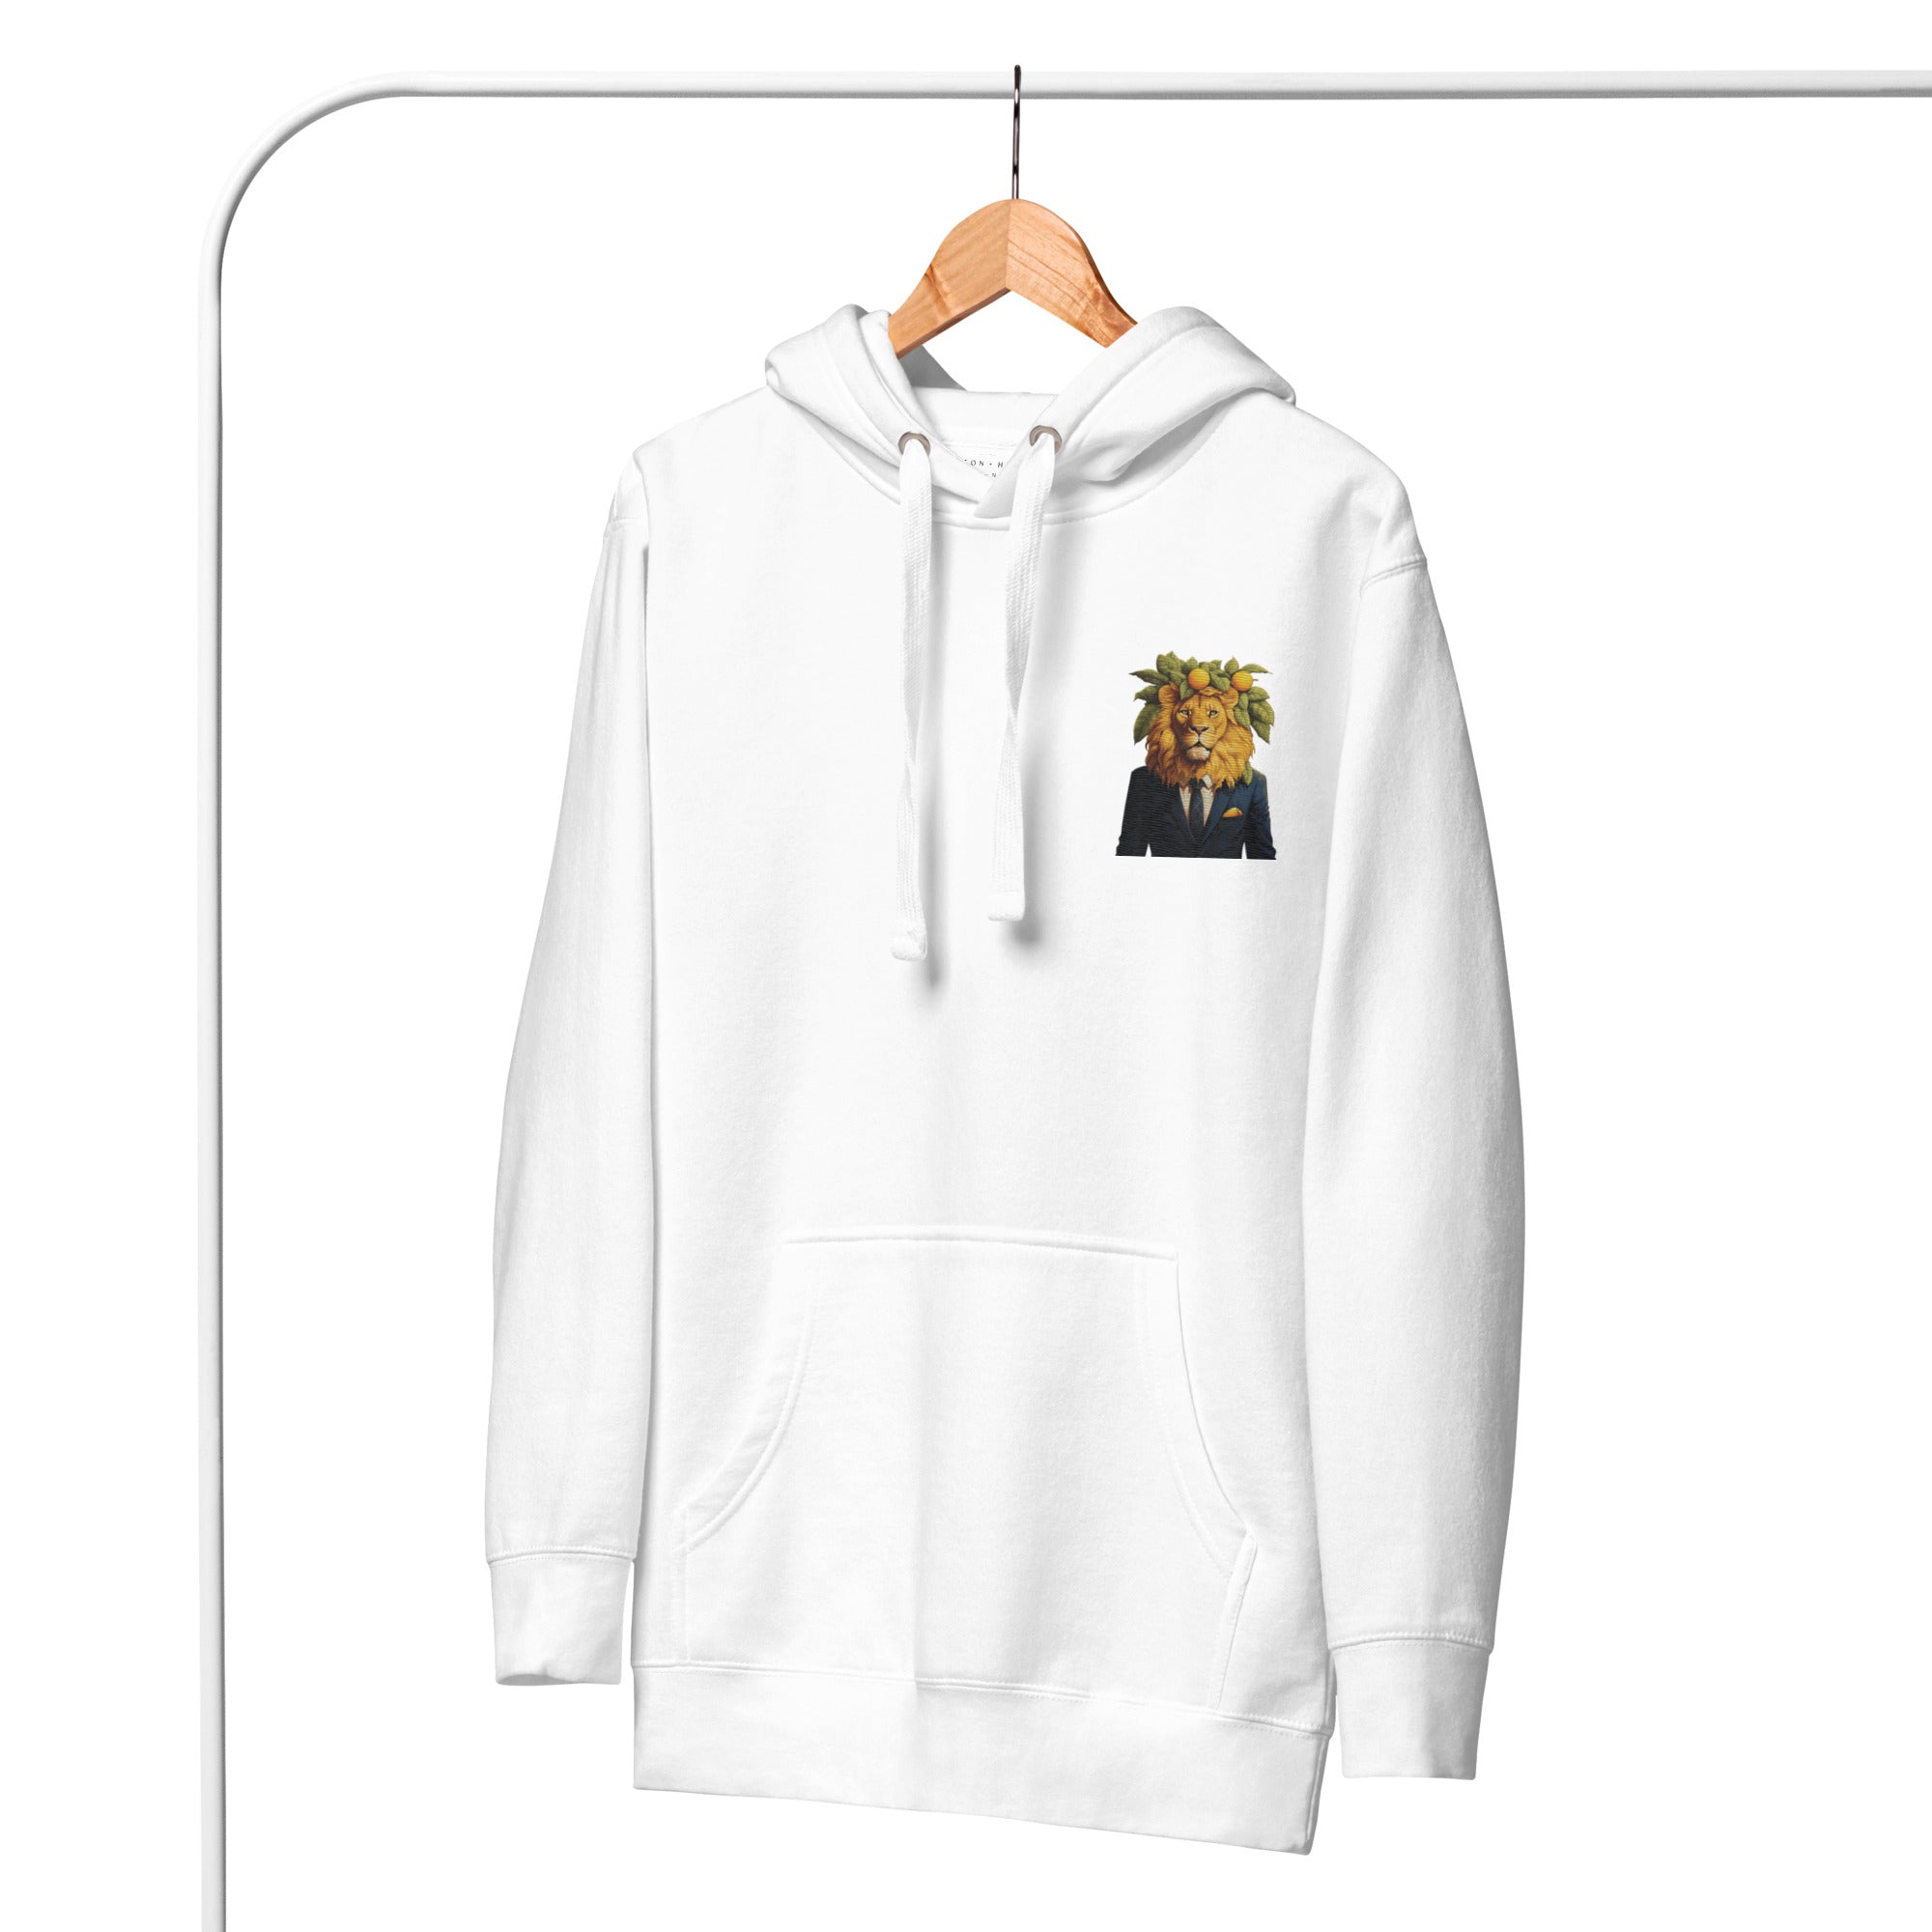 The Lion in the Orangerie Embroidered Hooded Unisex Sweater